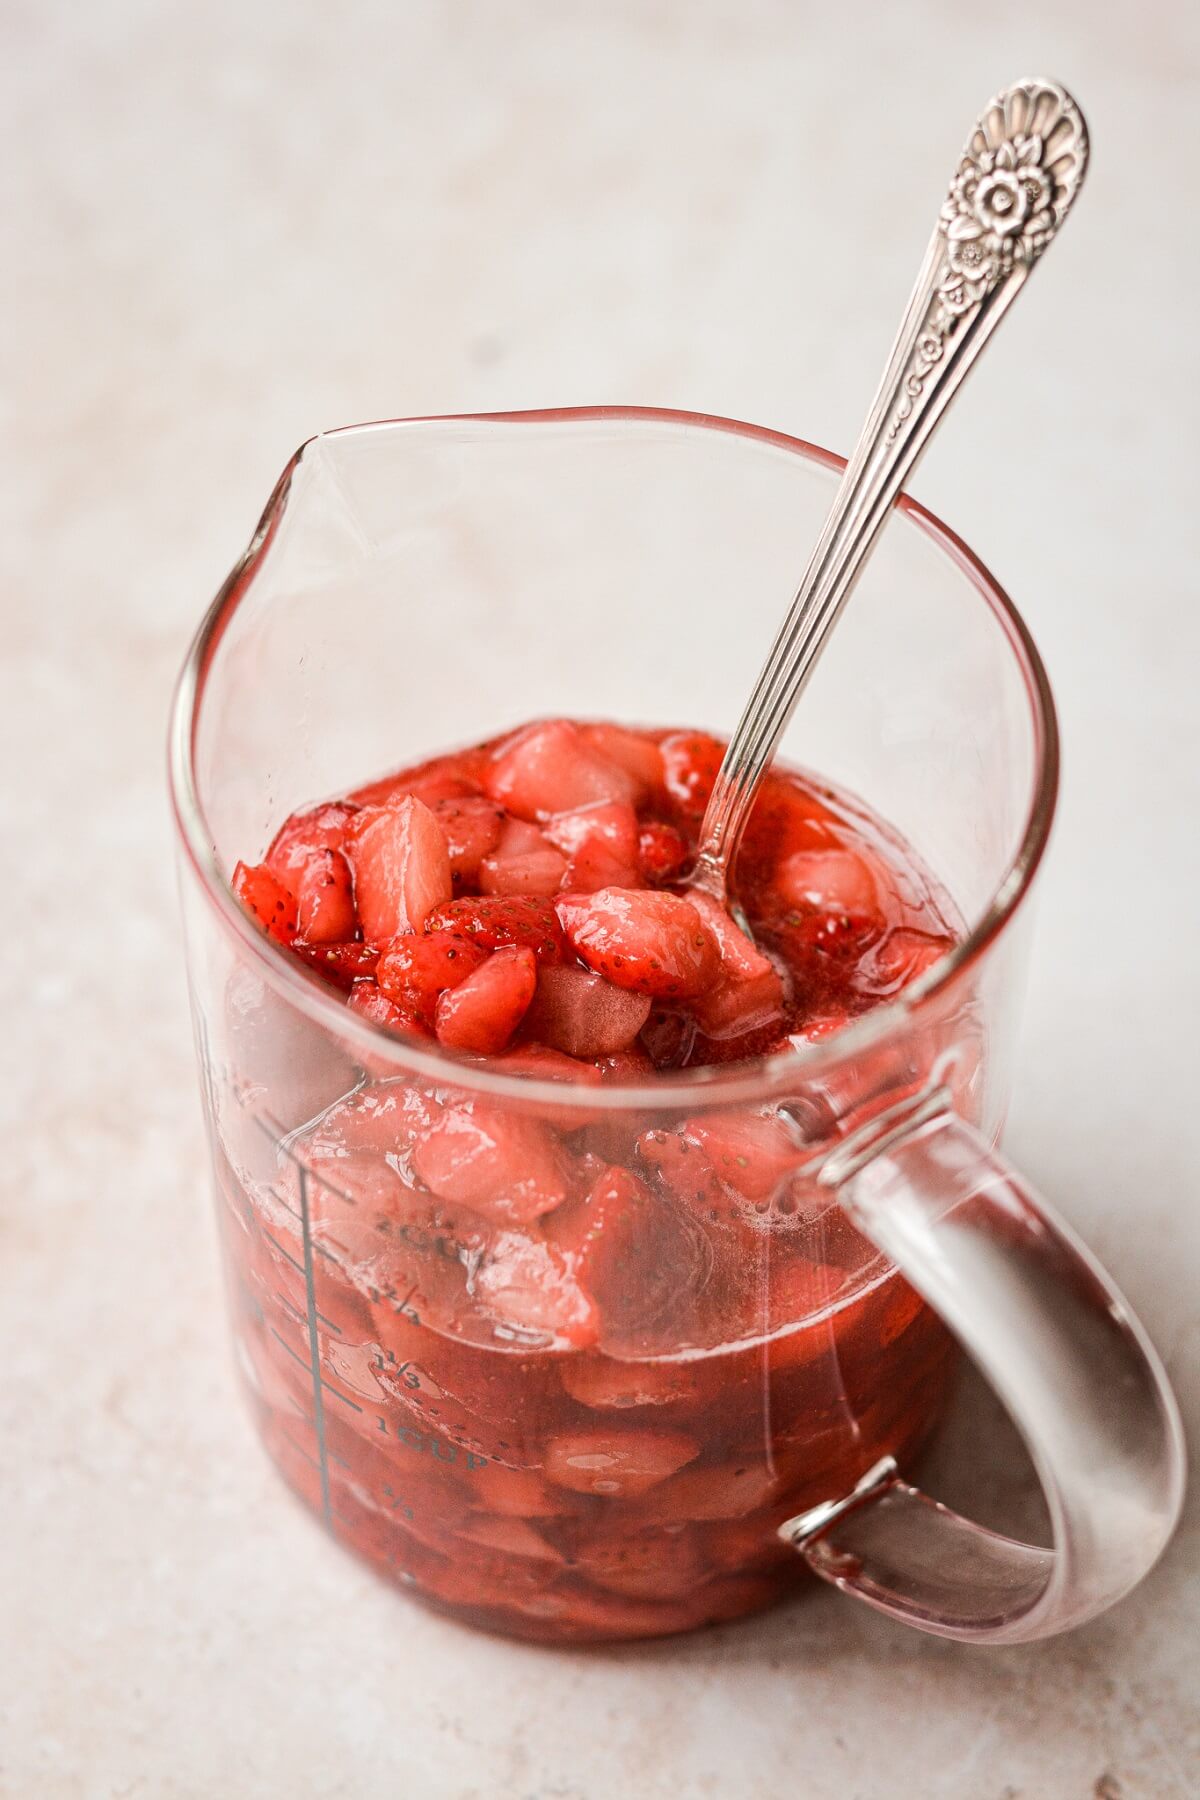 Glass measuring cup of strawberries.